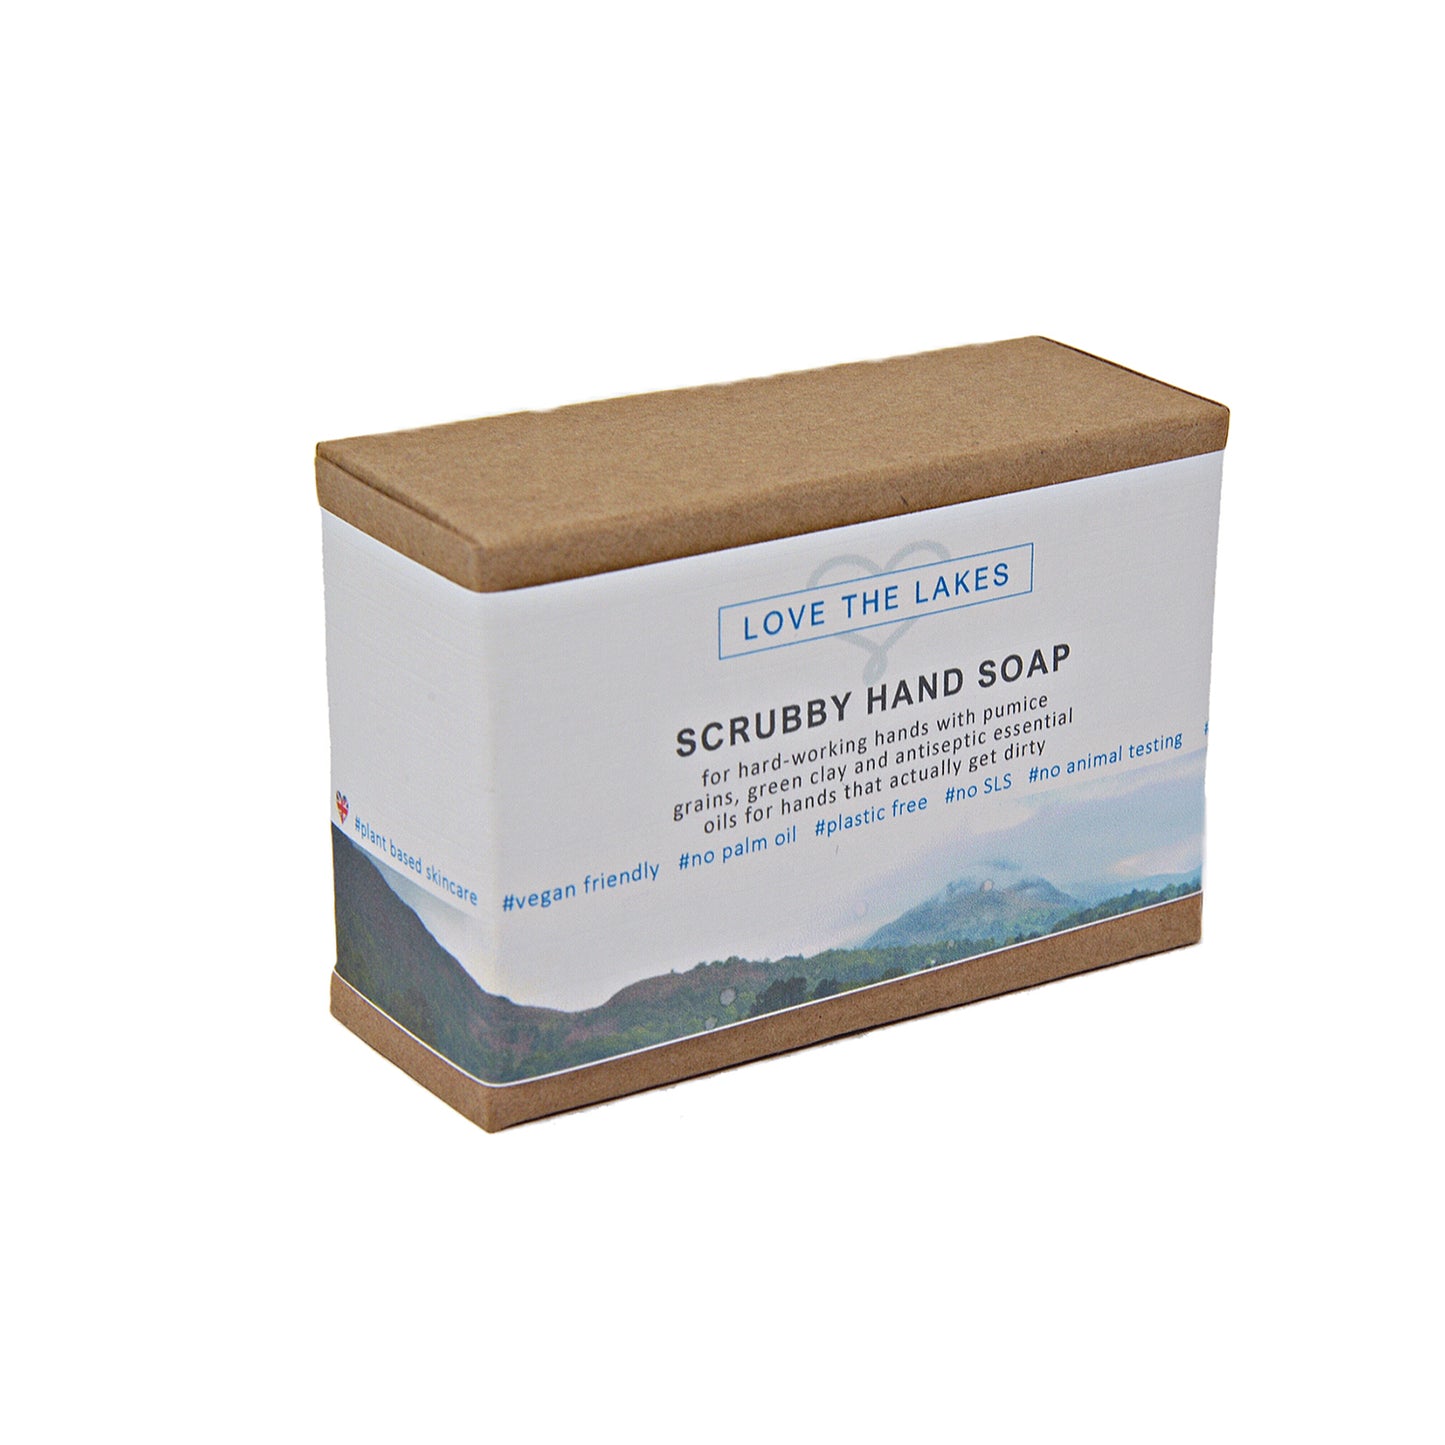 Love the Lakes Earth Savers Scrubby Hand Soap